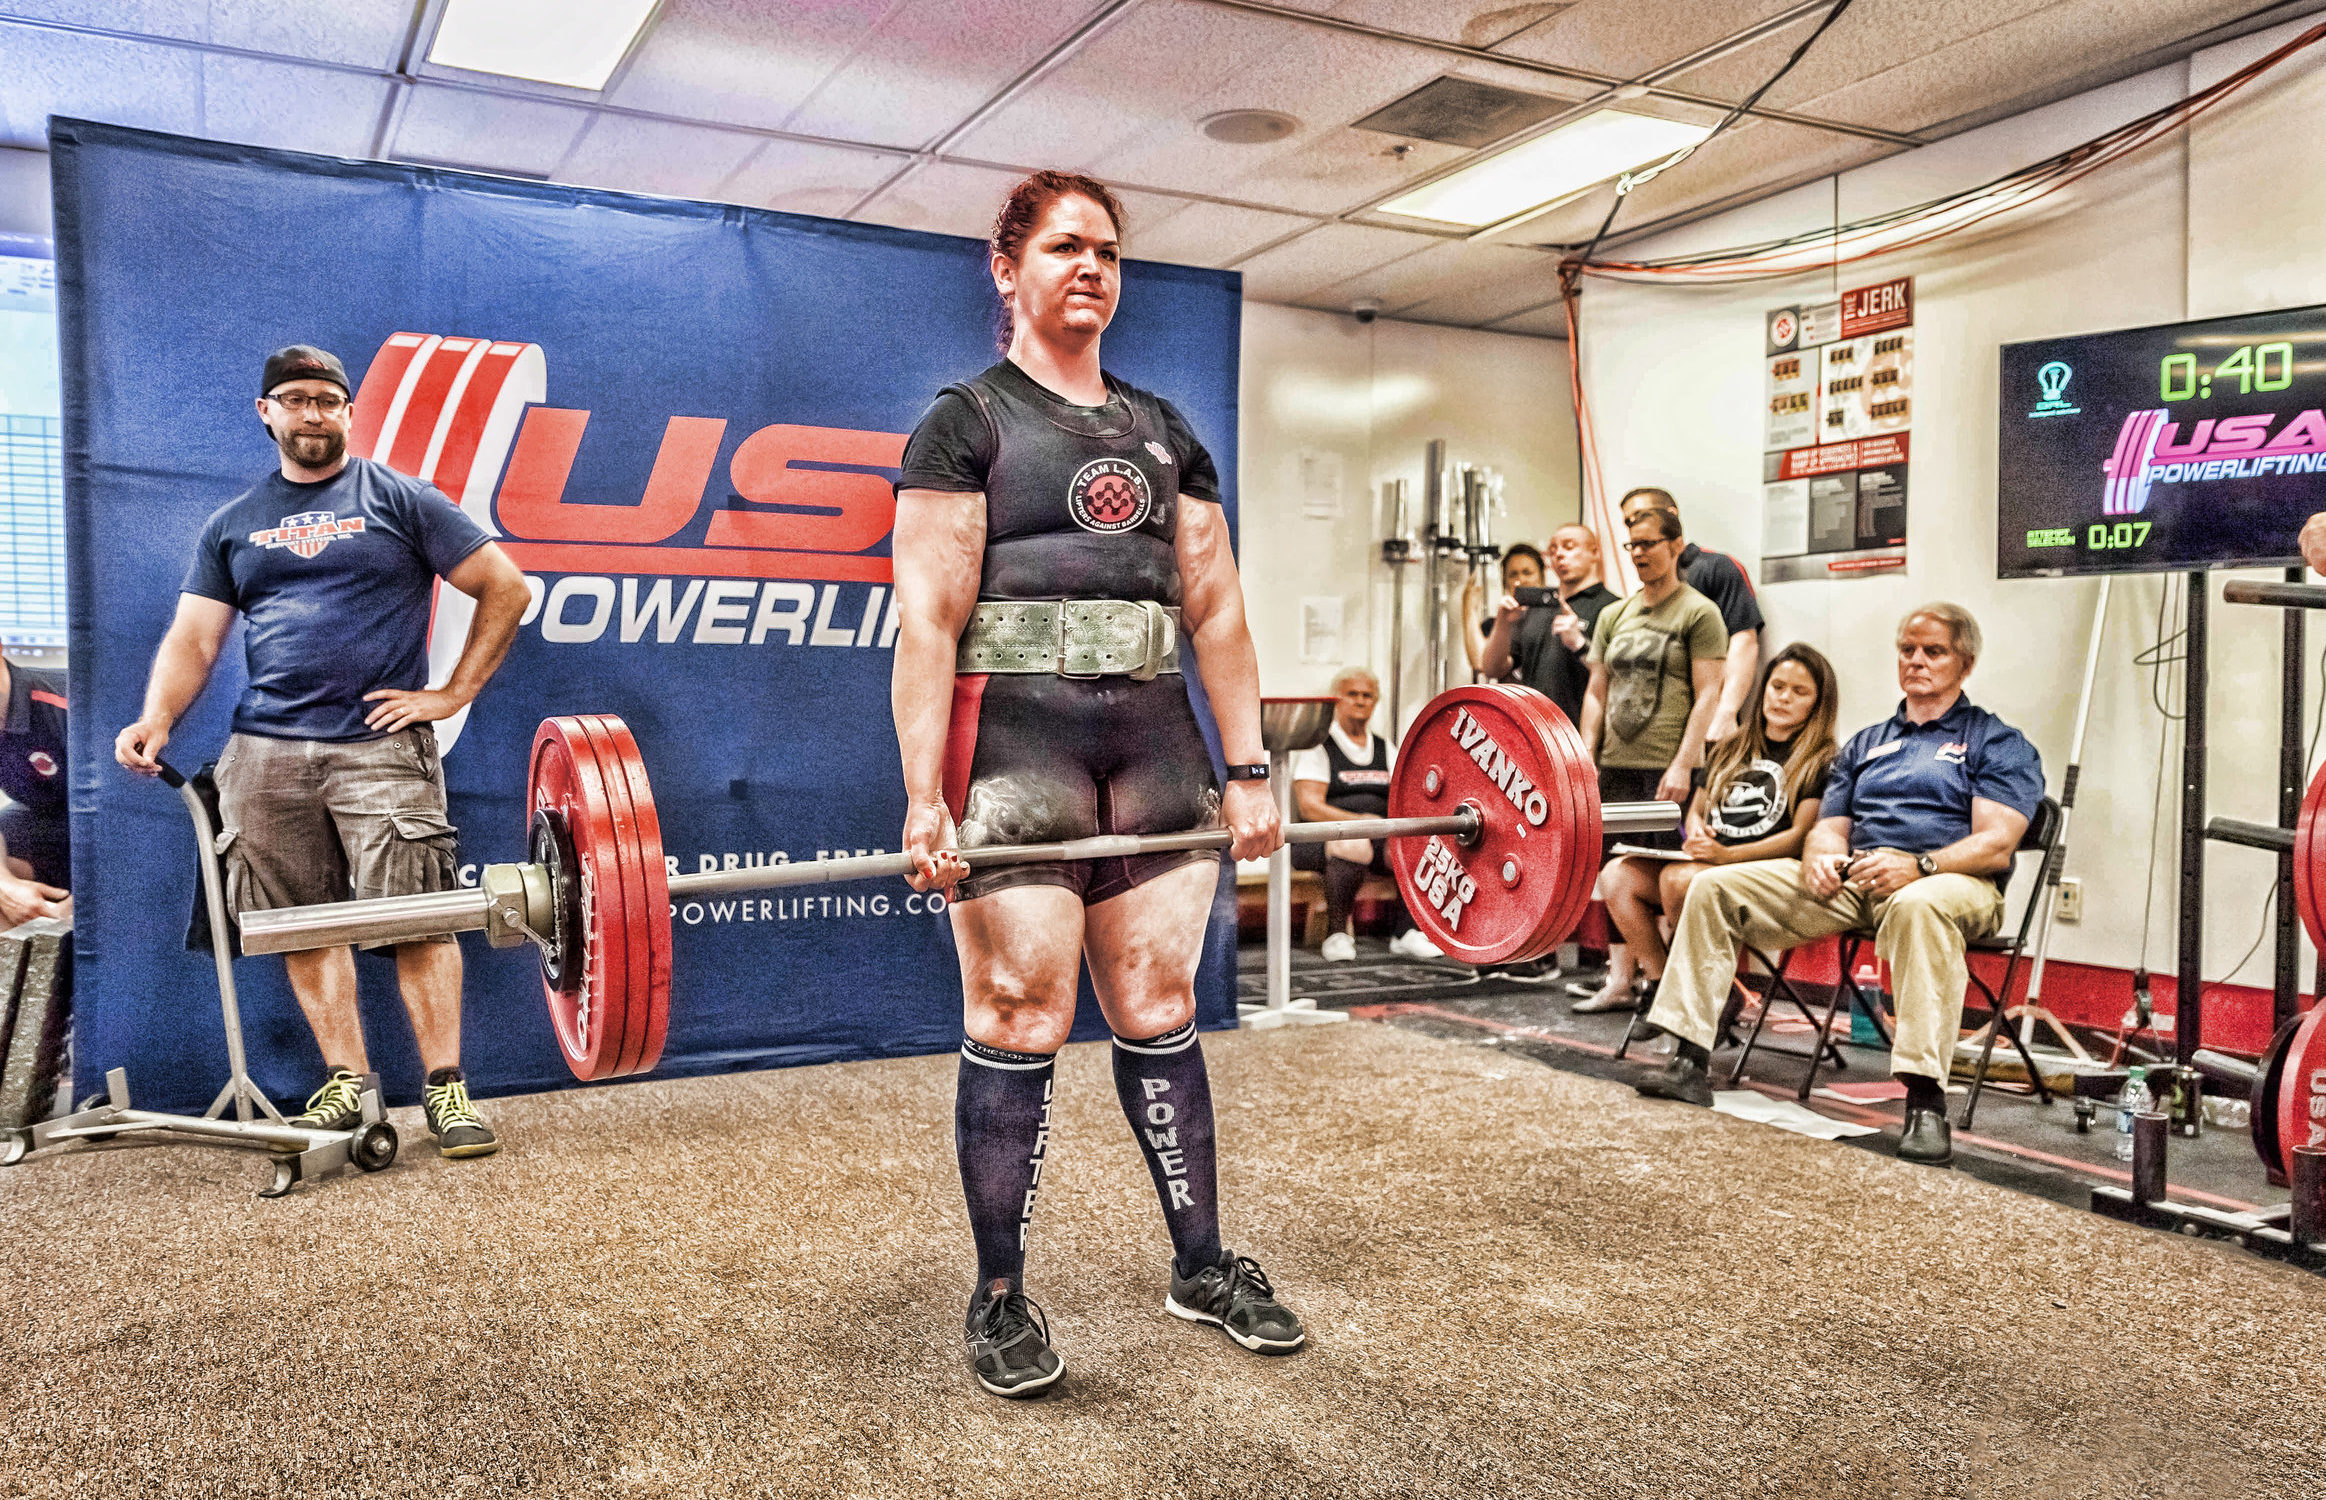 powerlifting-competition-how-this-relates-to-digital-marketing